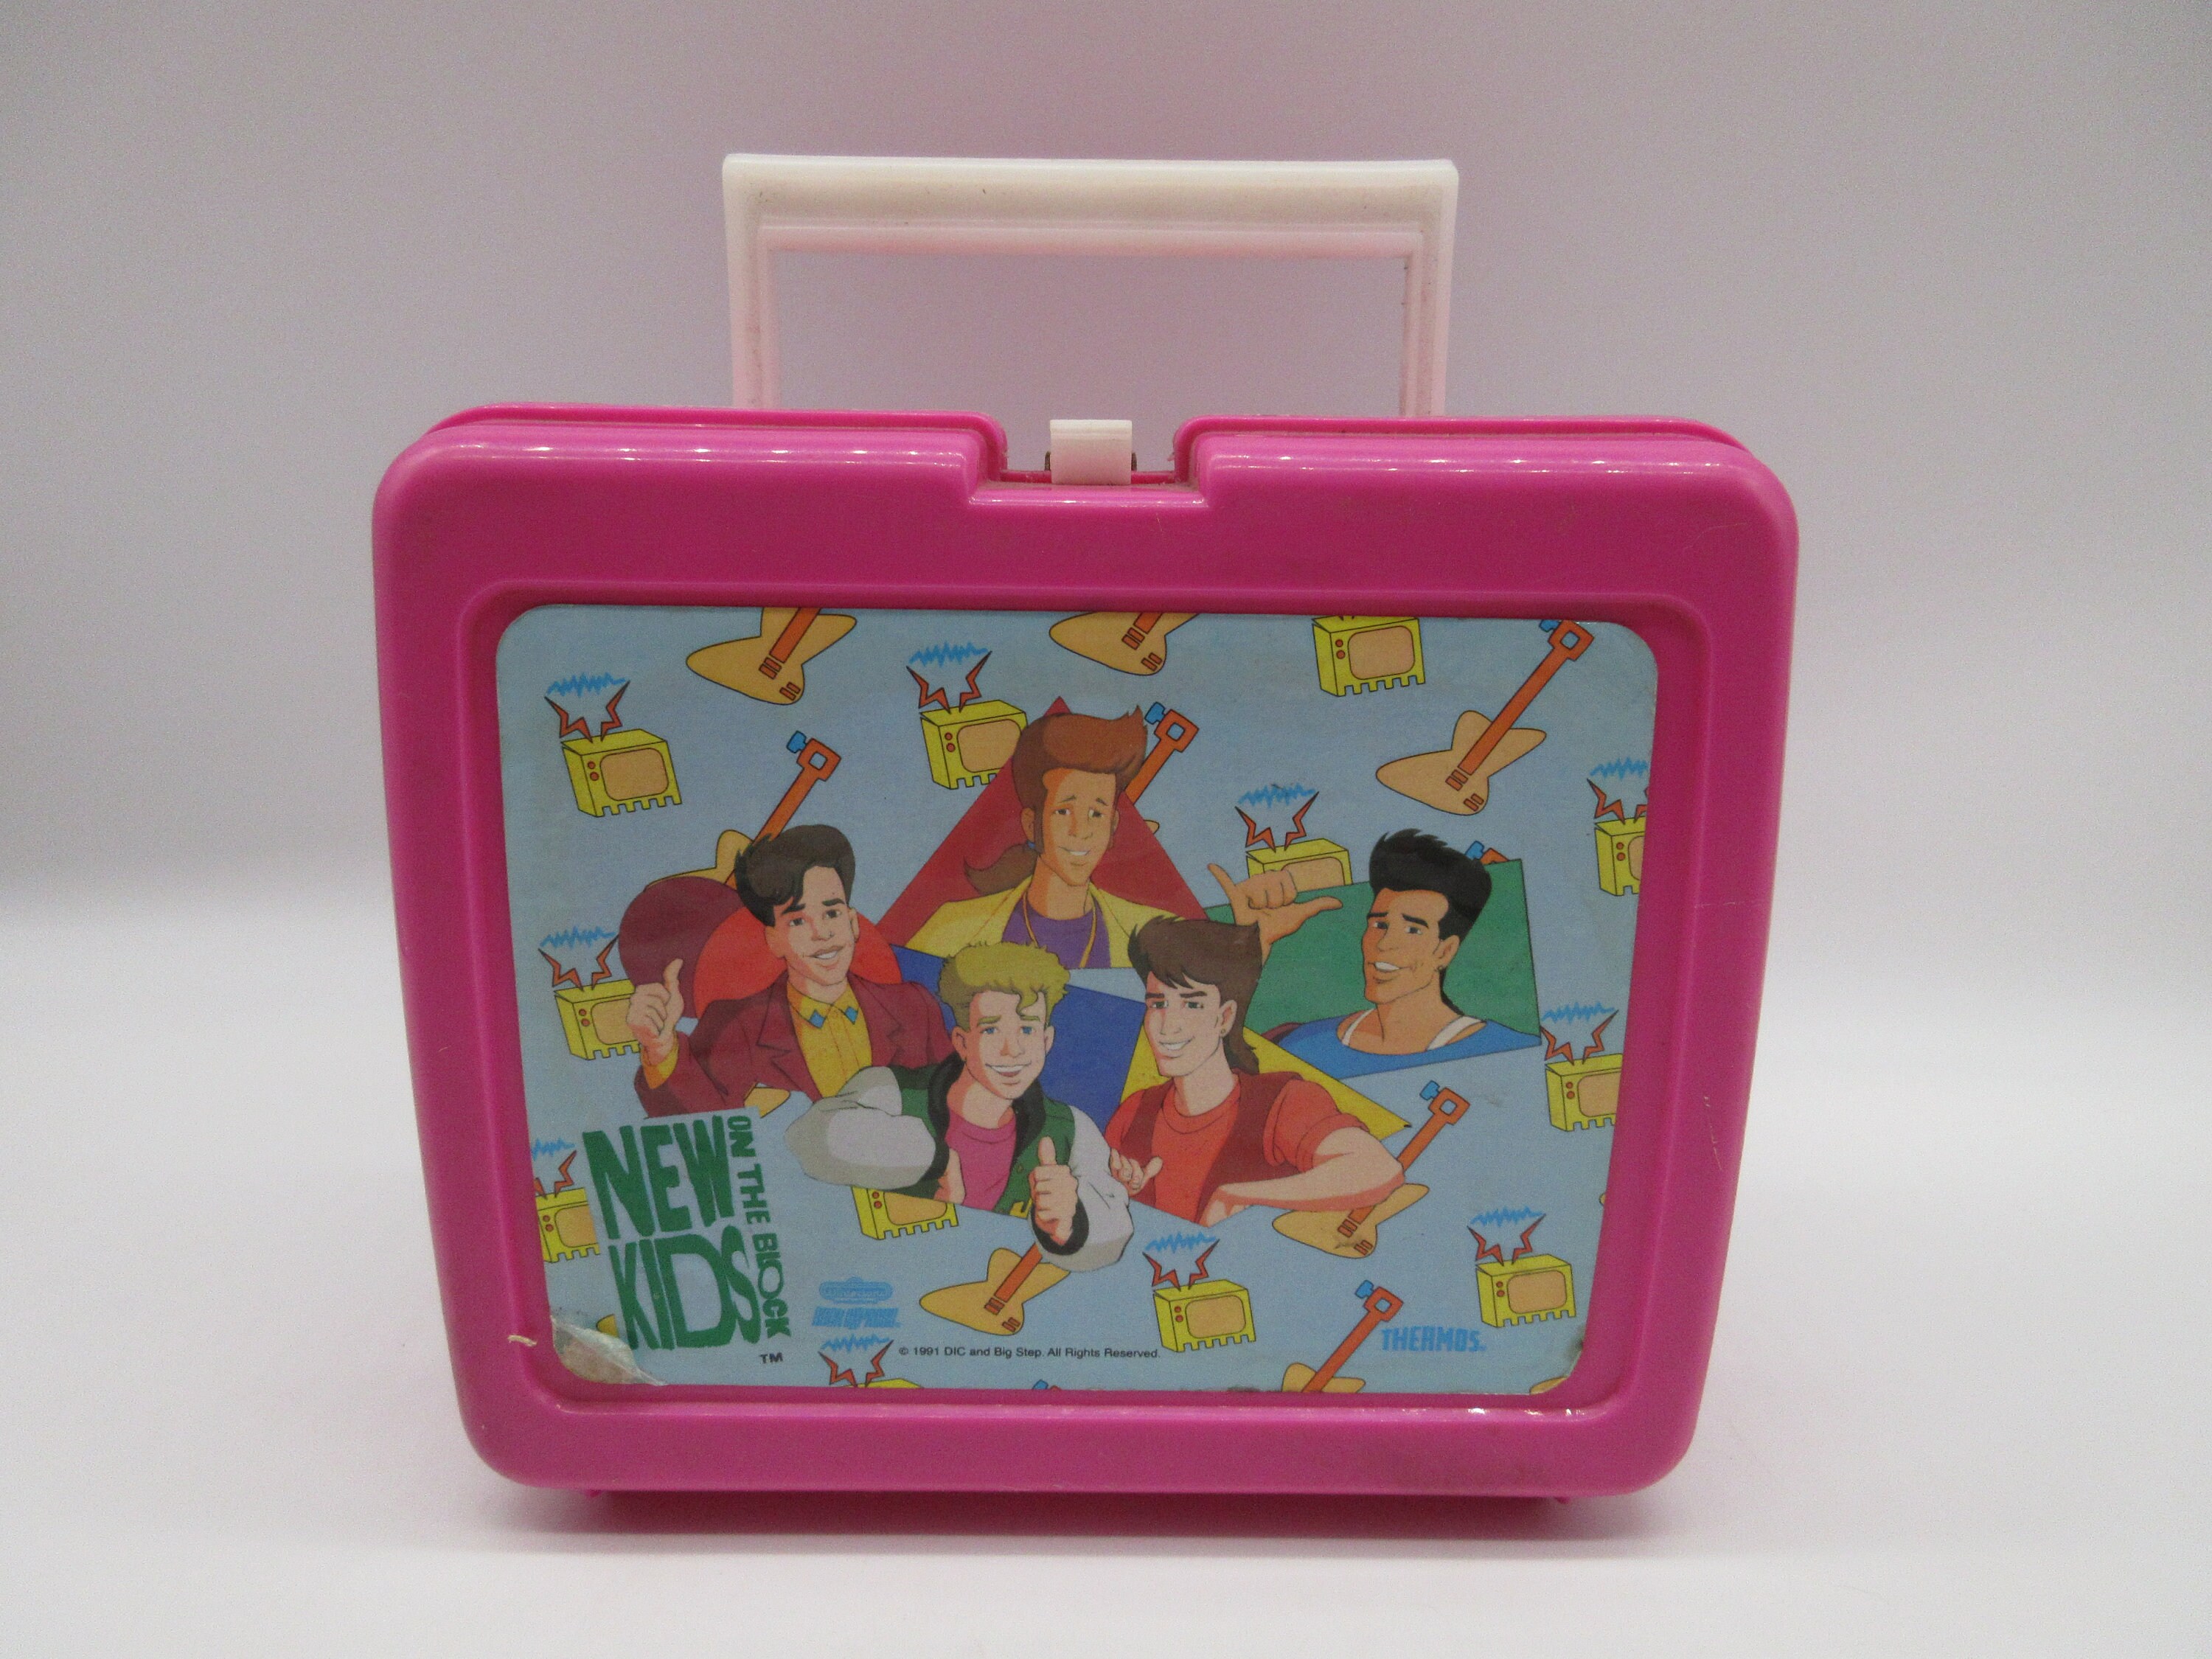 Vintage NEW KIDS ON THE BLOCK Thermos Lunch Box 1991